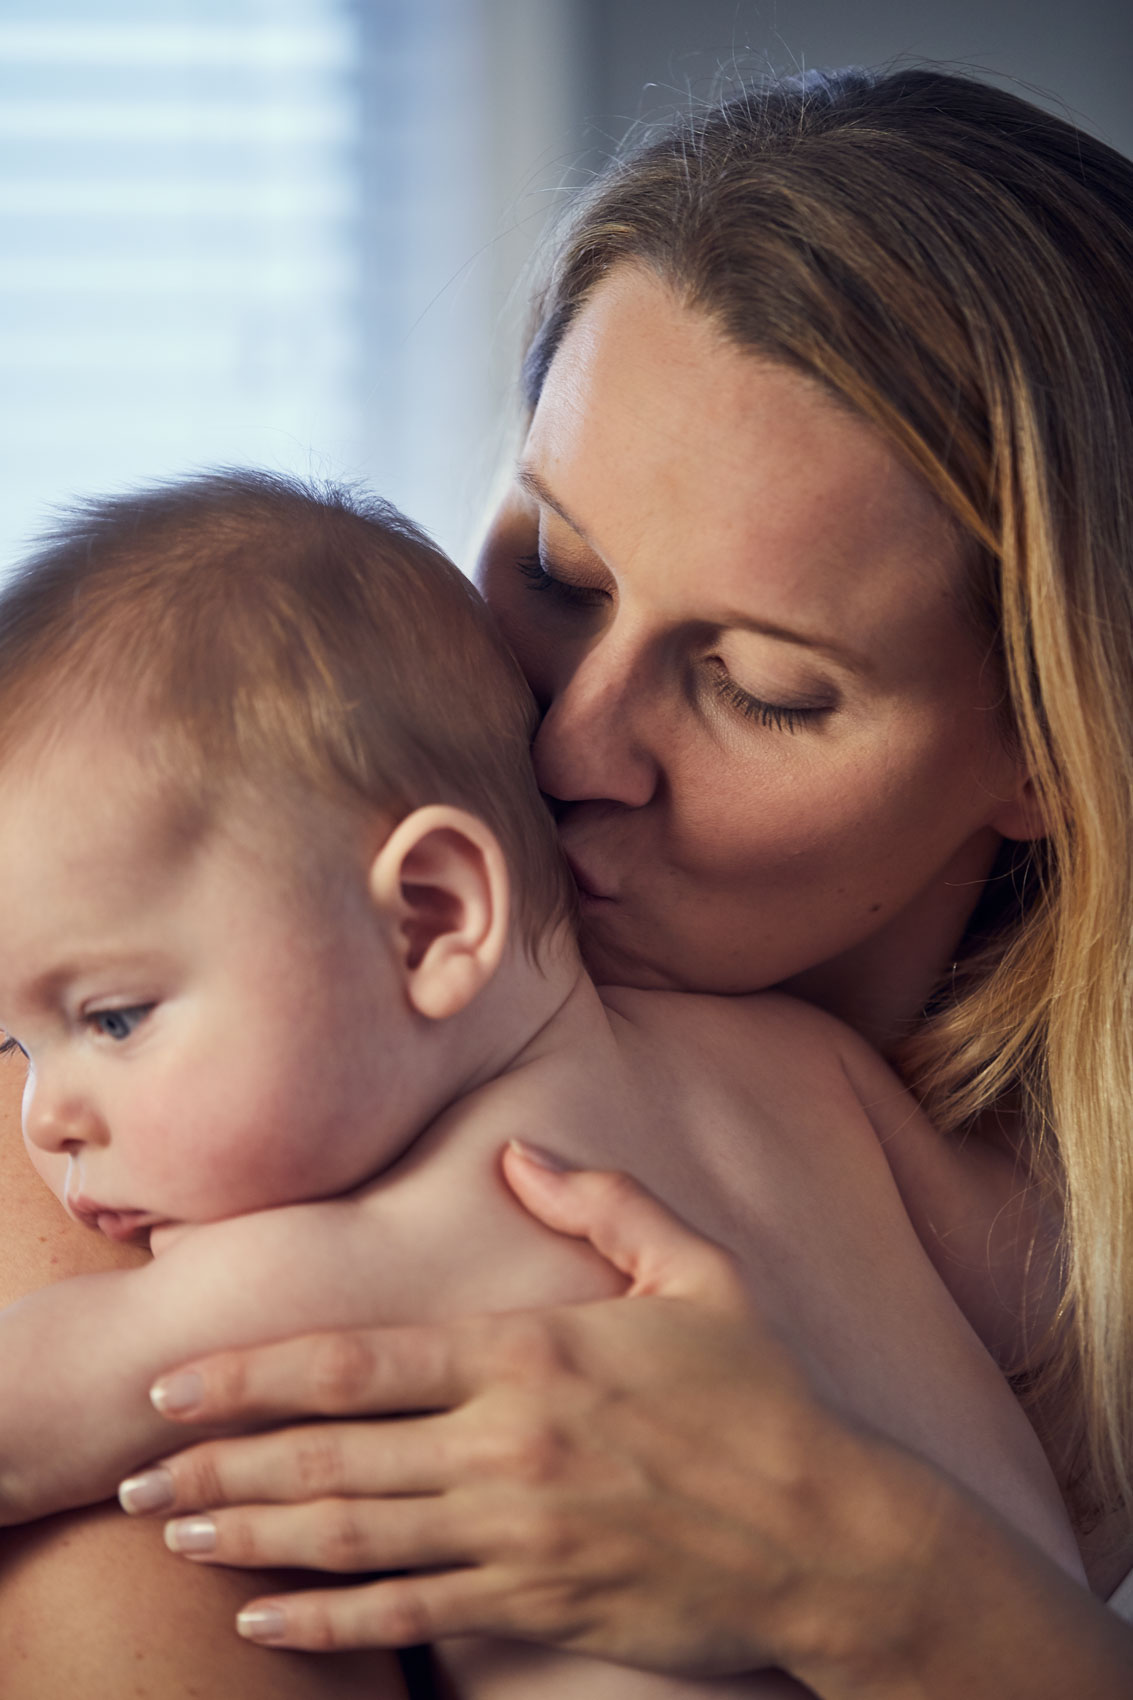 mom kissing baby on neck, washington dc commercial photography